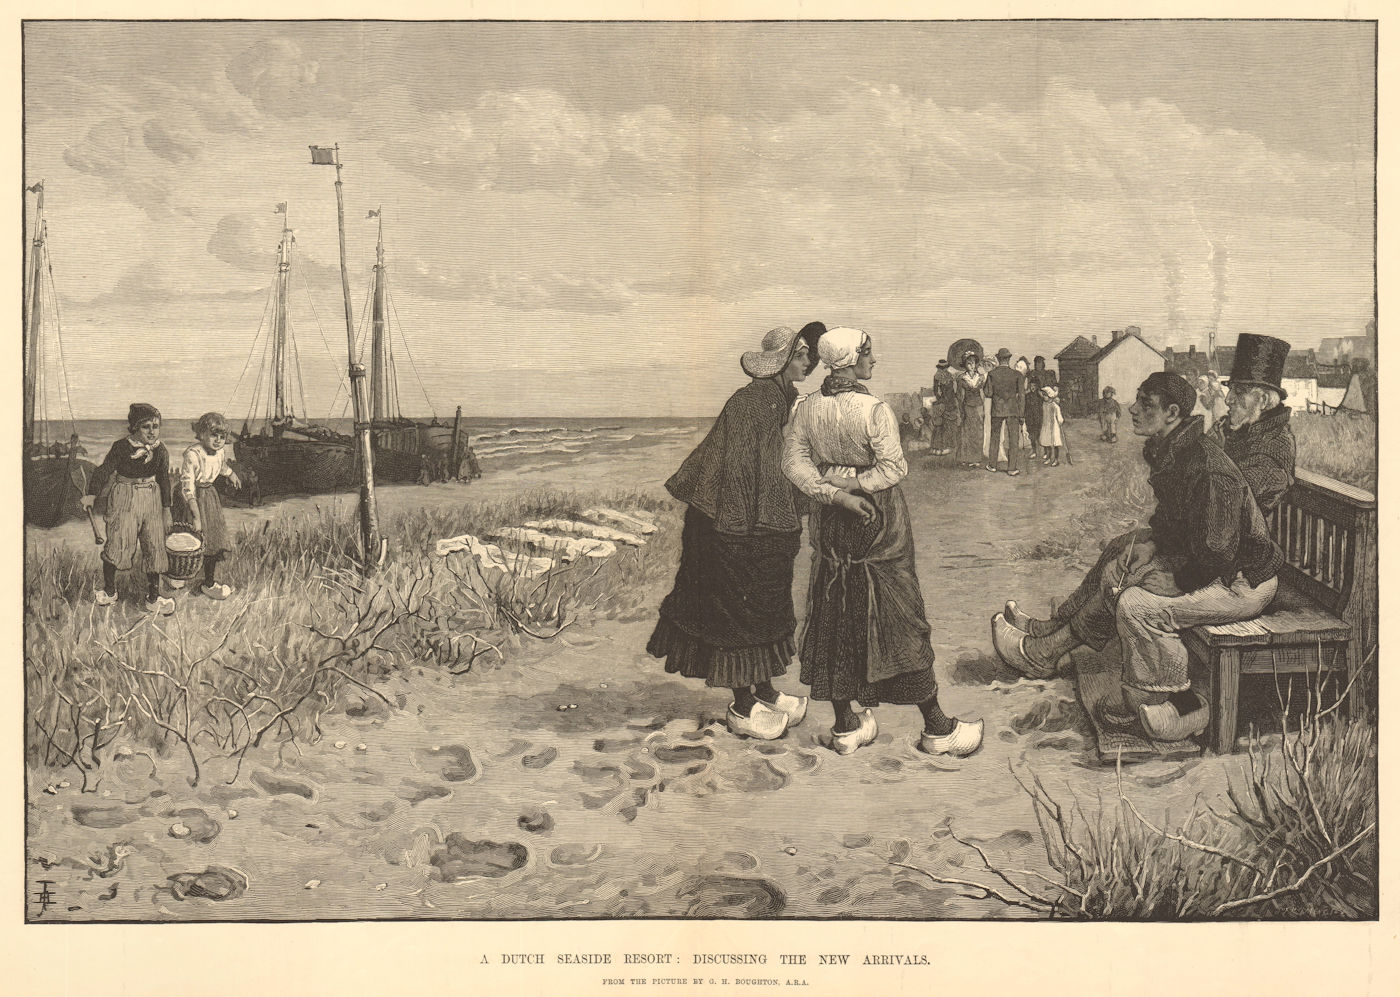 Associate Product A Dutch seaside resort: discussing the new arrivals, by G. H. Boughton 1883